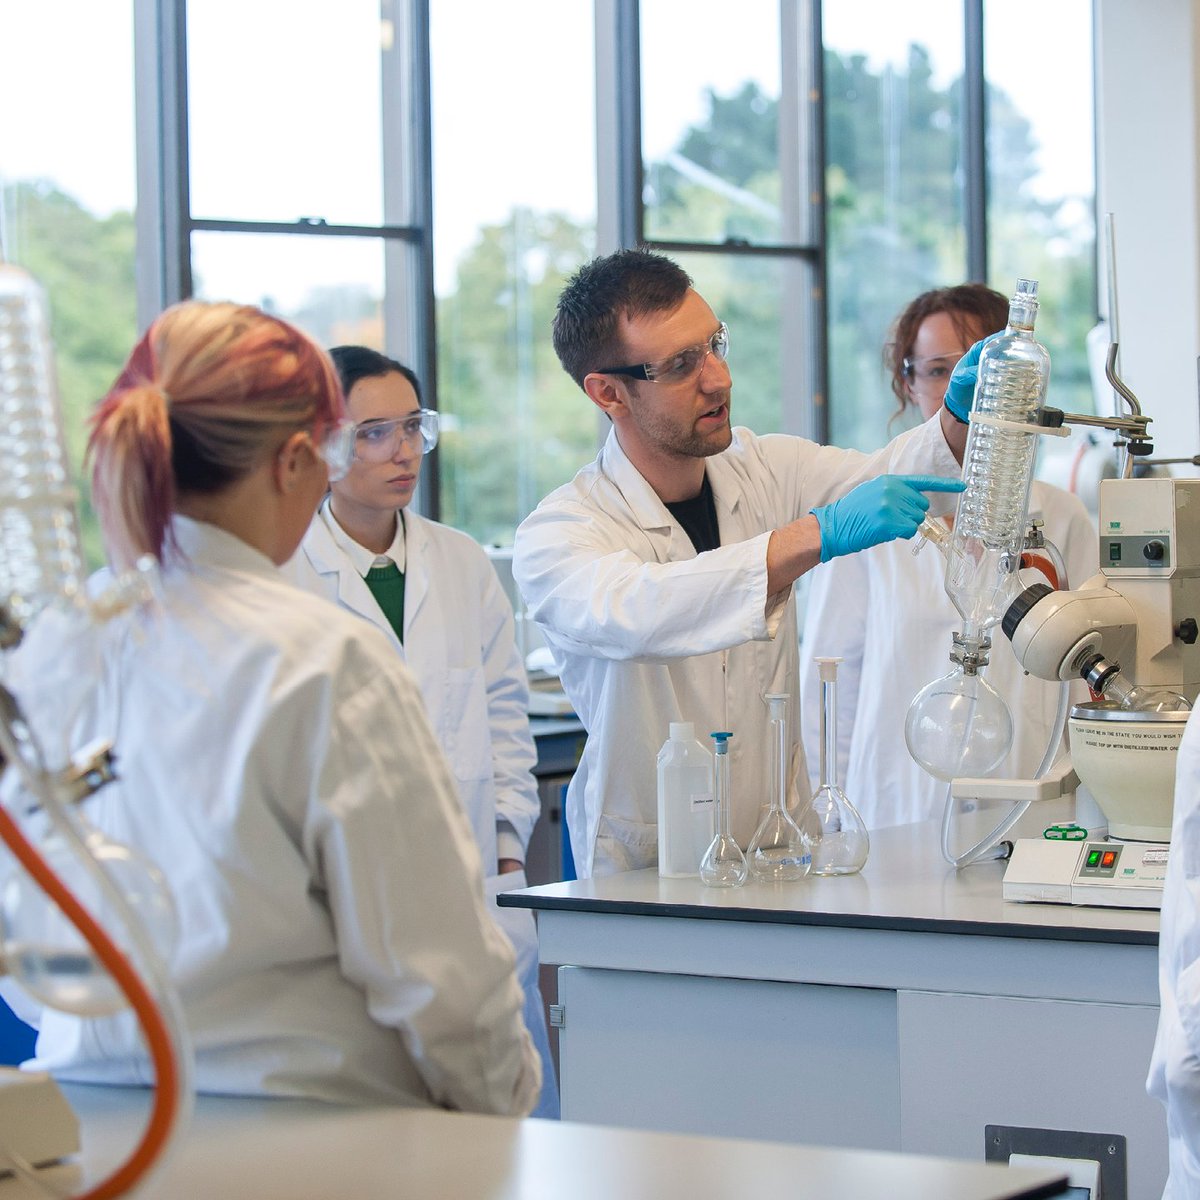 Thinking about studying chemistry at UEA? Talk to our Clearing team! Go to uea.ac.uk/study/clearing to find out more!

#ThisIsUEA #Clearing2023 #ALevelResults #UEAChemistry